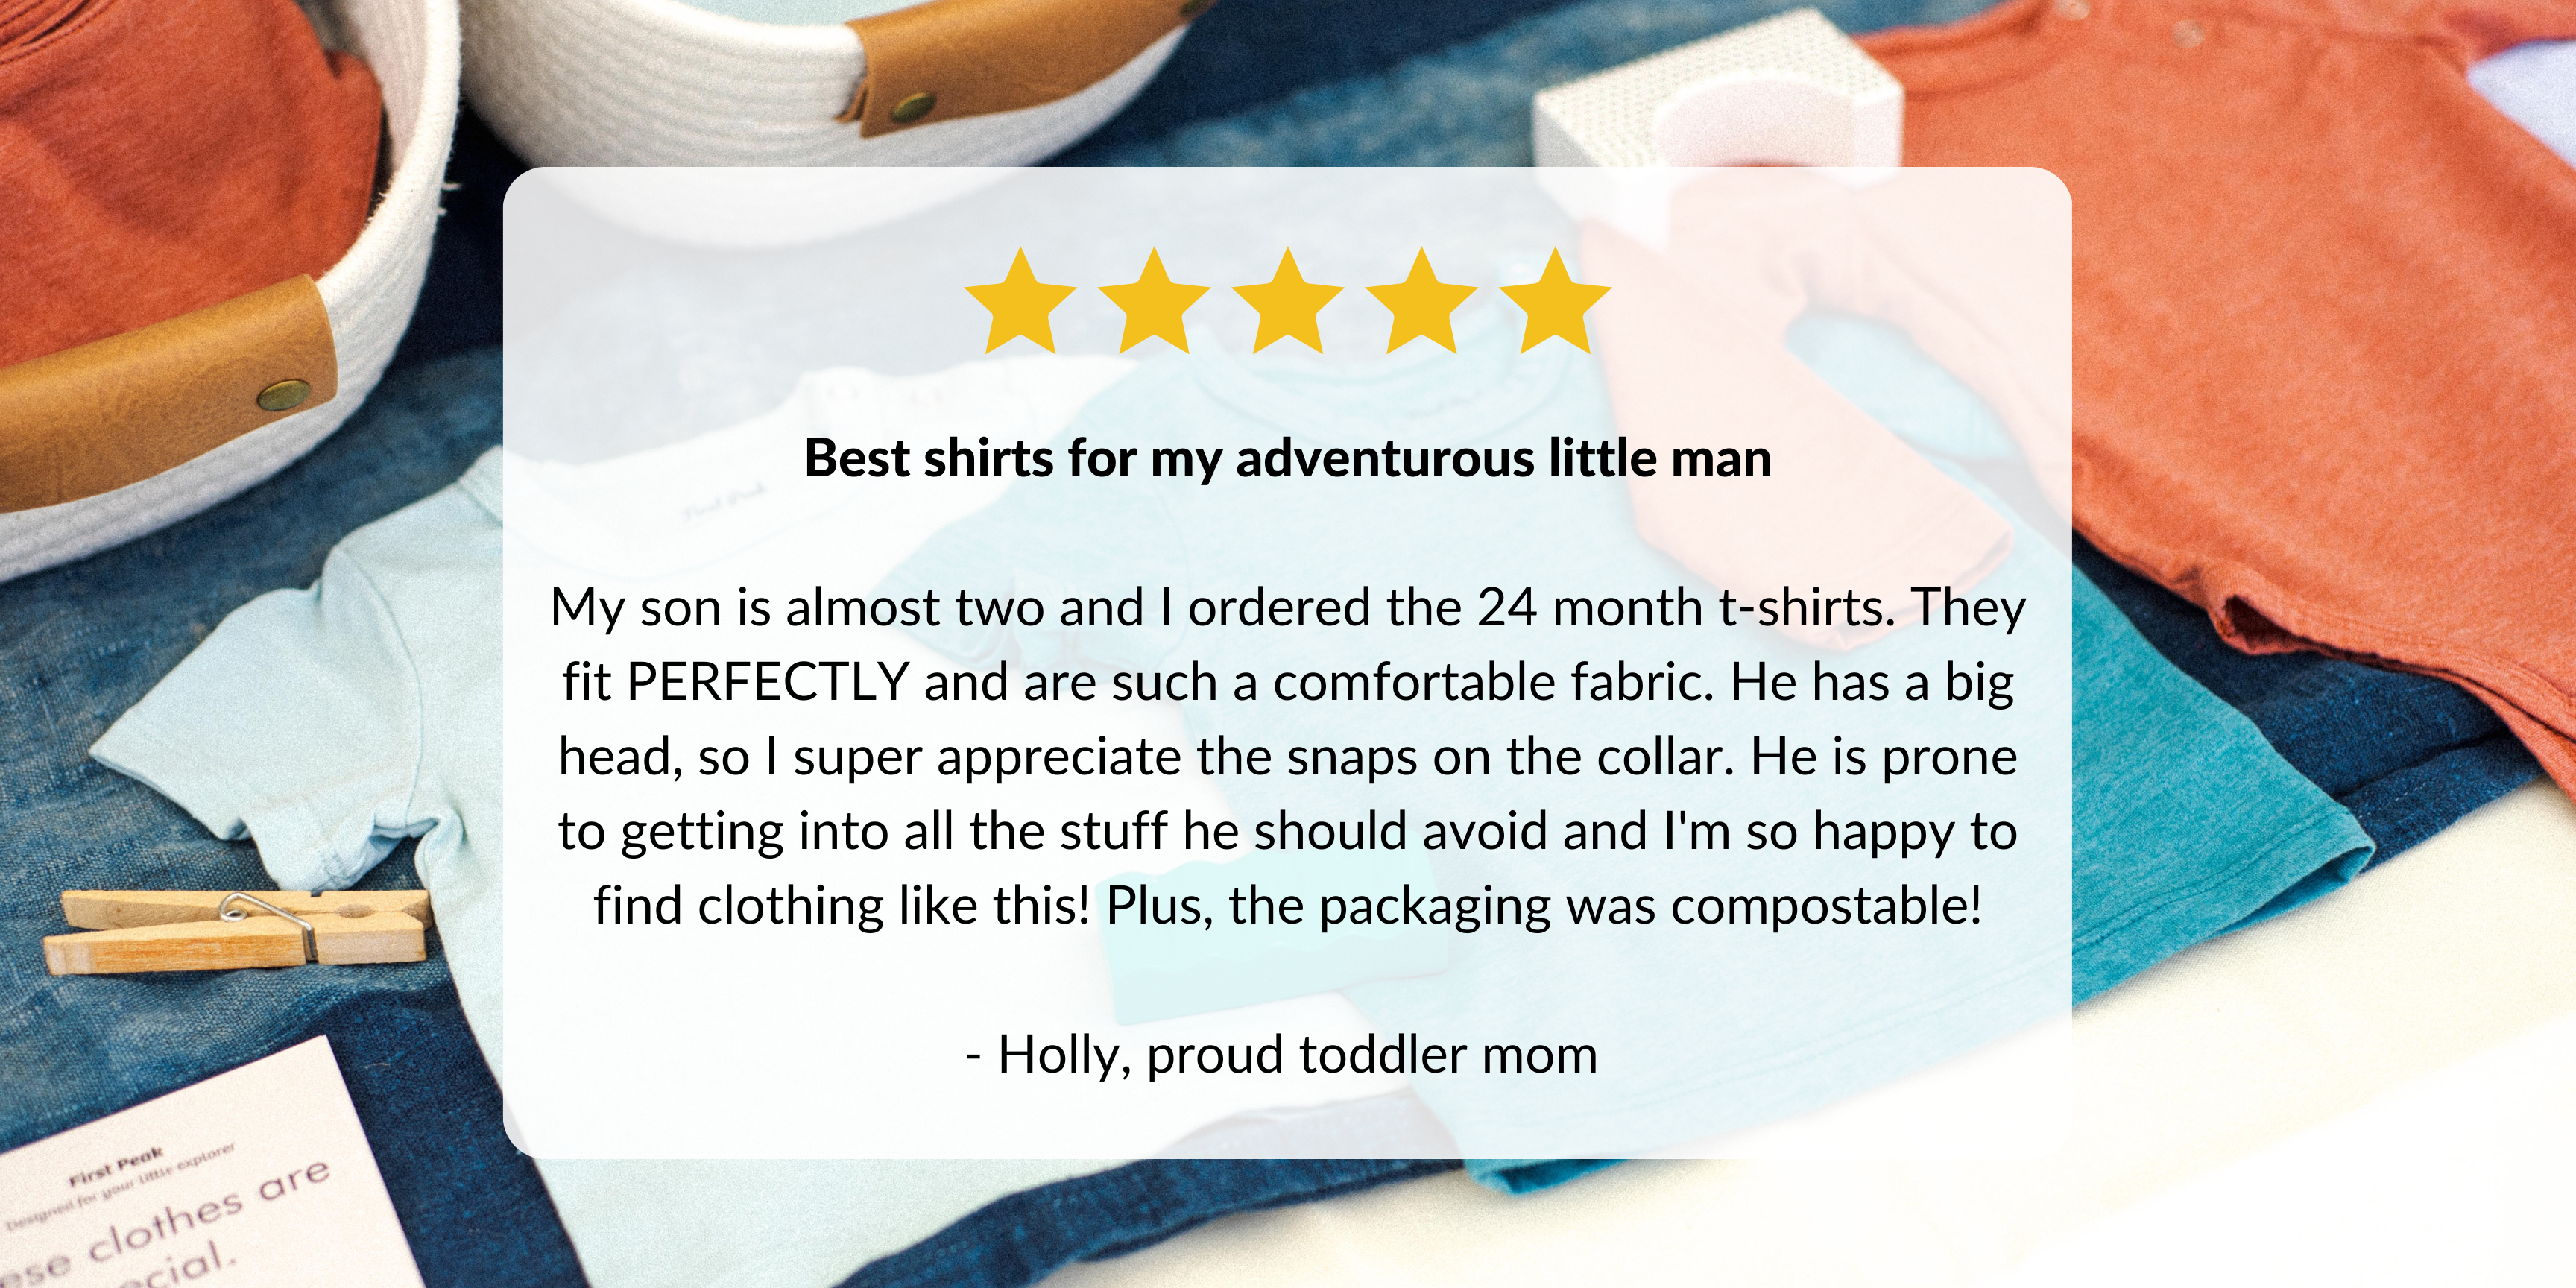 My son is almost two and I order the 24 month t-shirts. They fit PERFECTLY and are such a comfortable fabric. He has a big head and so I super appreciate the snaps on the collar. He is super prone to getting into all the stuff he should avoid